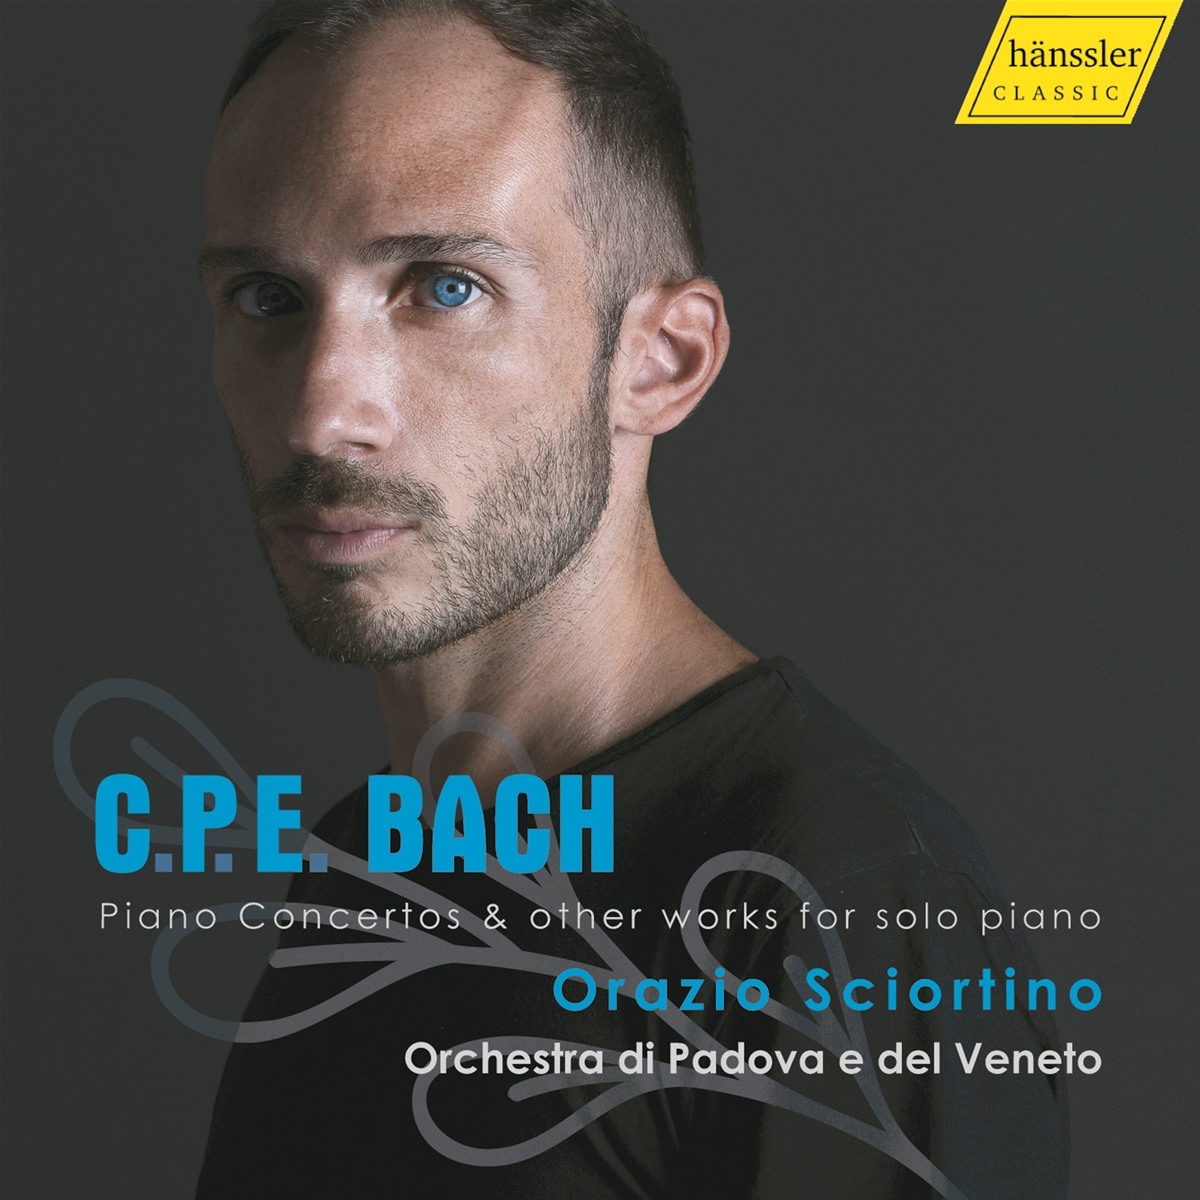 C.P.E.Bach Piano Concertos & other works for solo